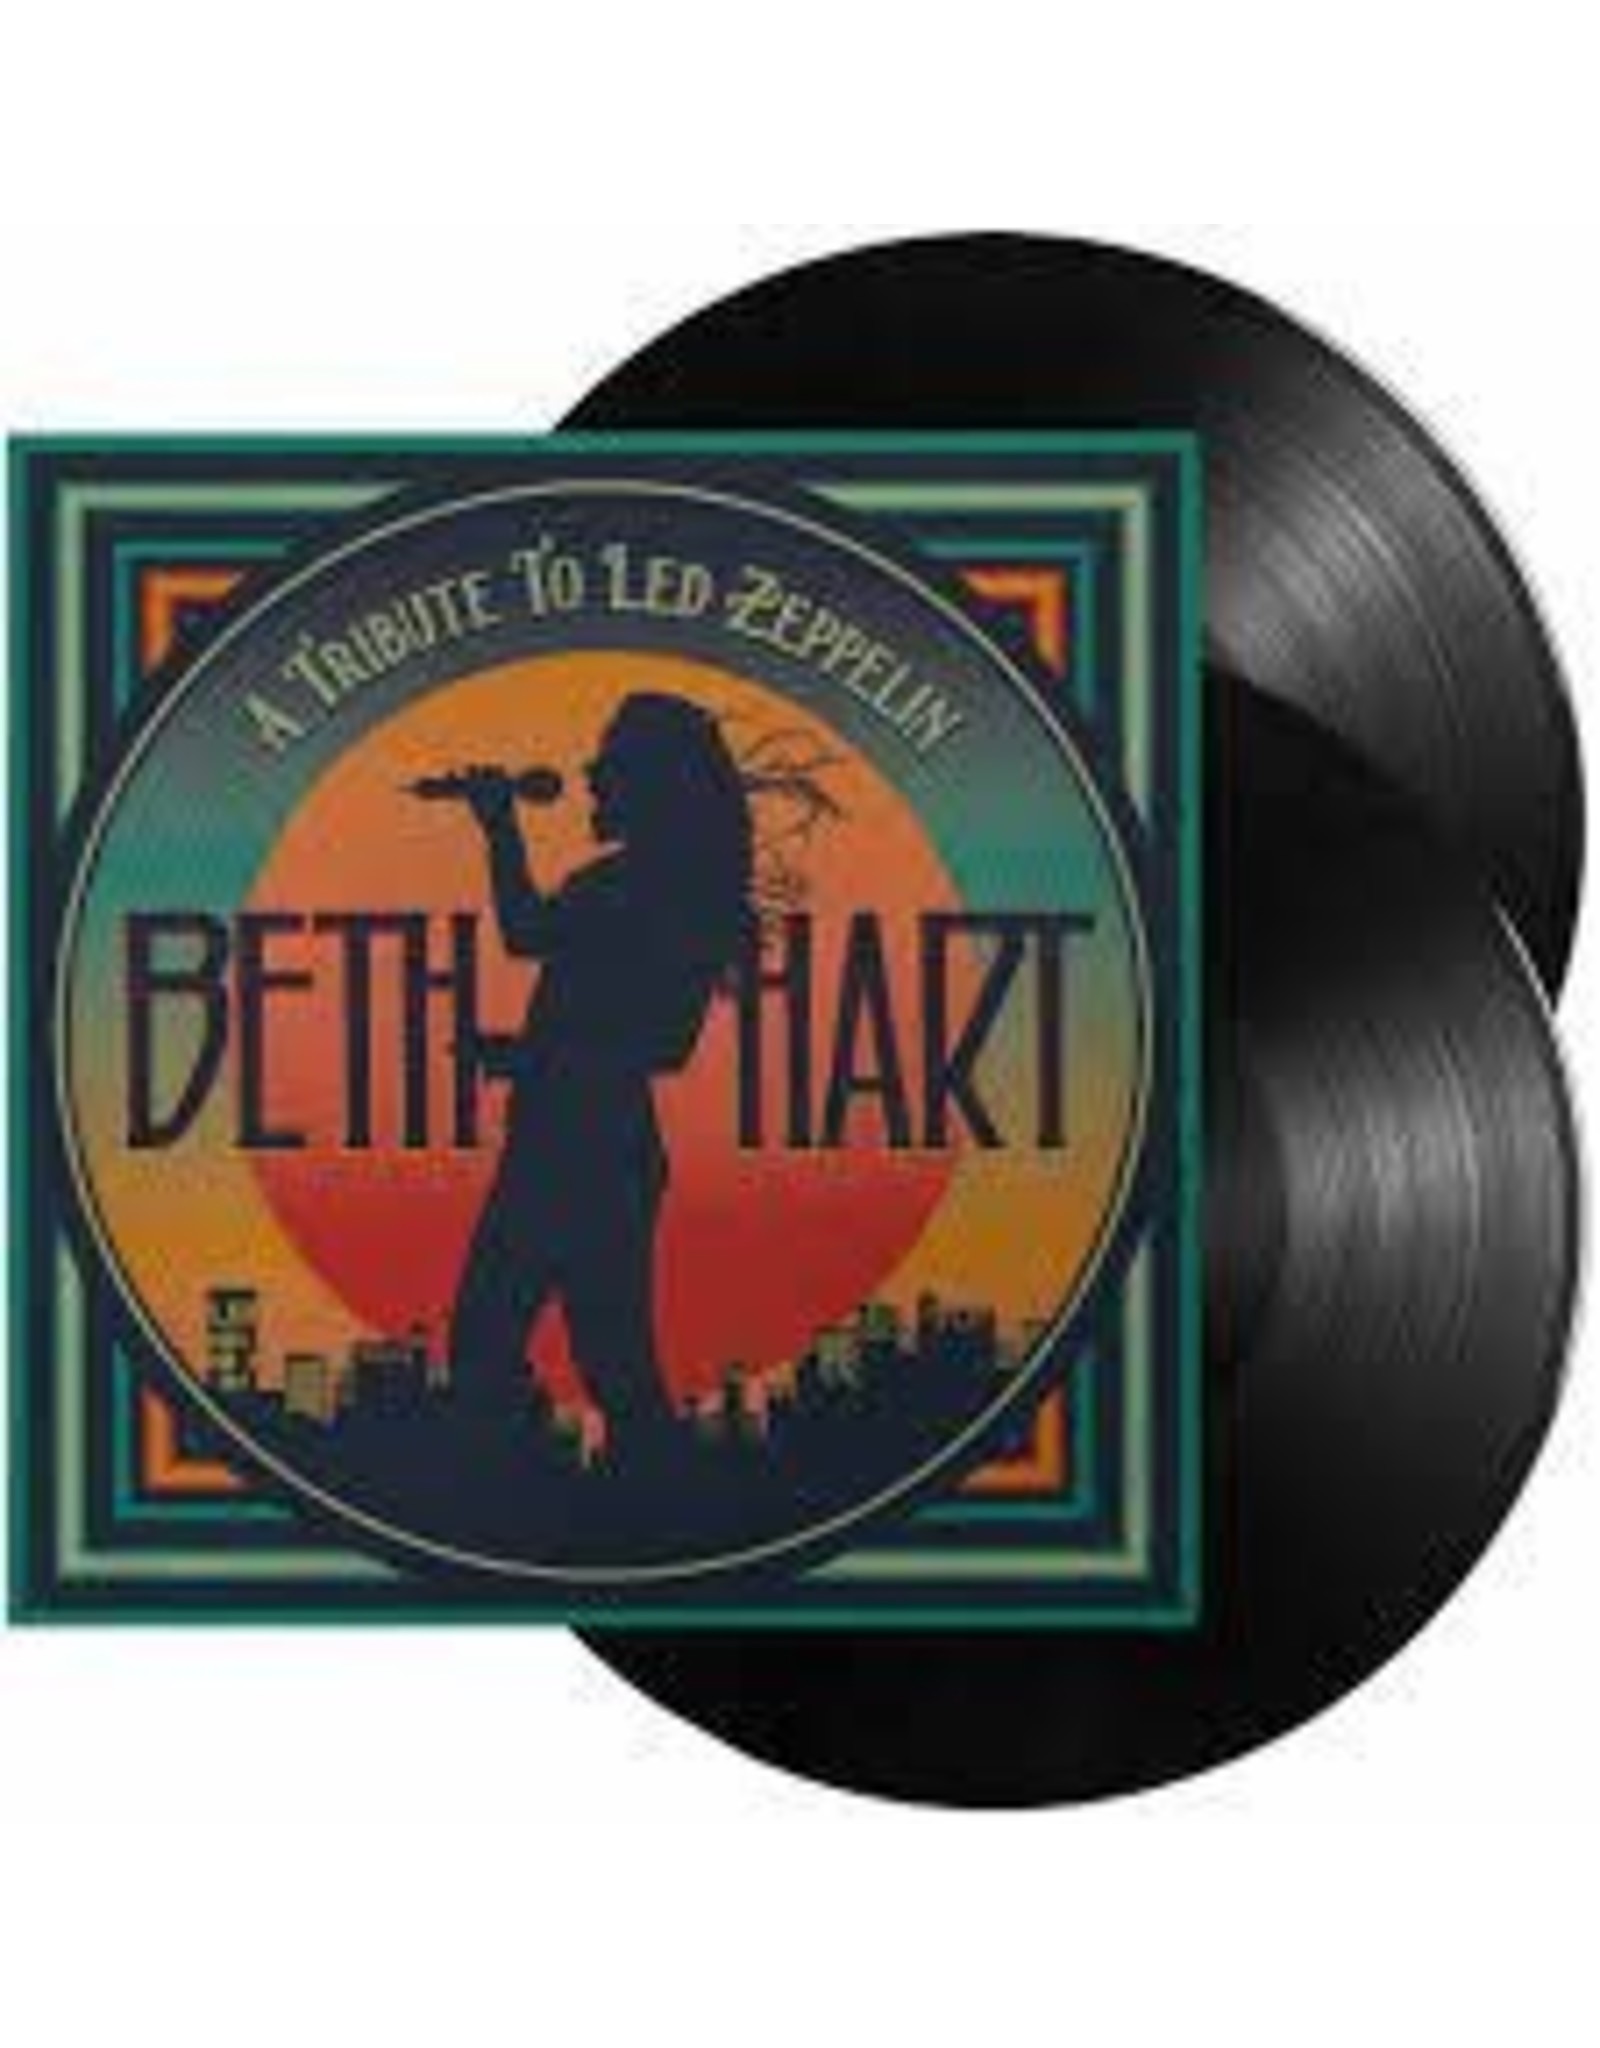 Hart, Beth - A Tribute To Led Zeppelin 2 LP 180g